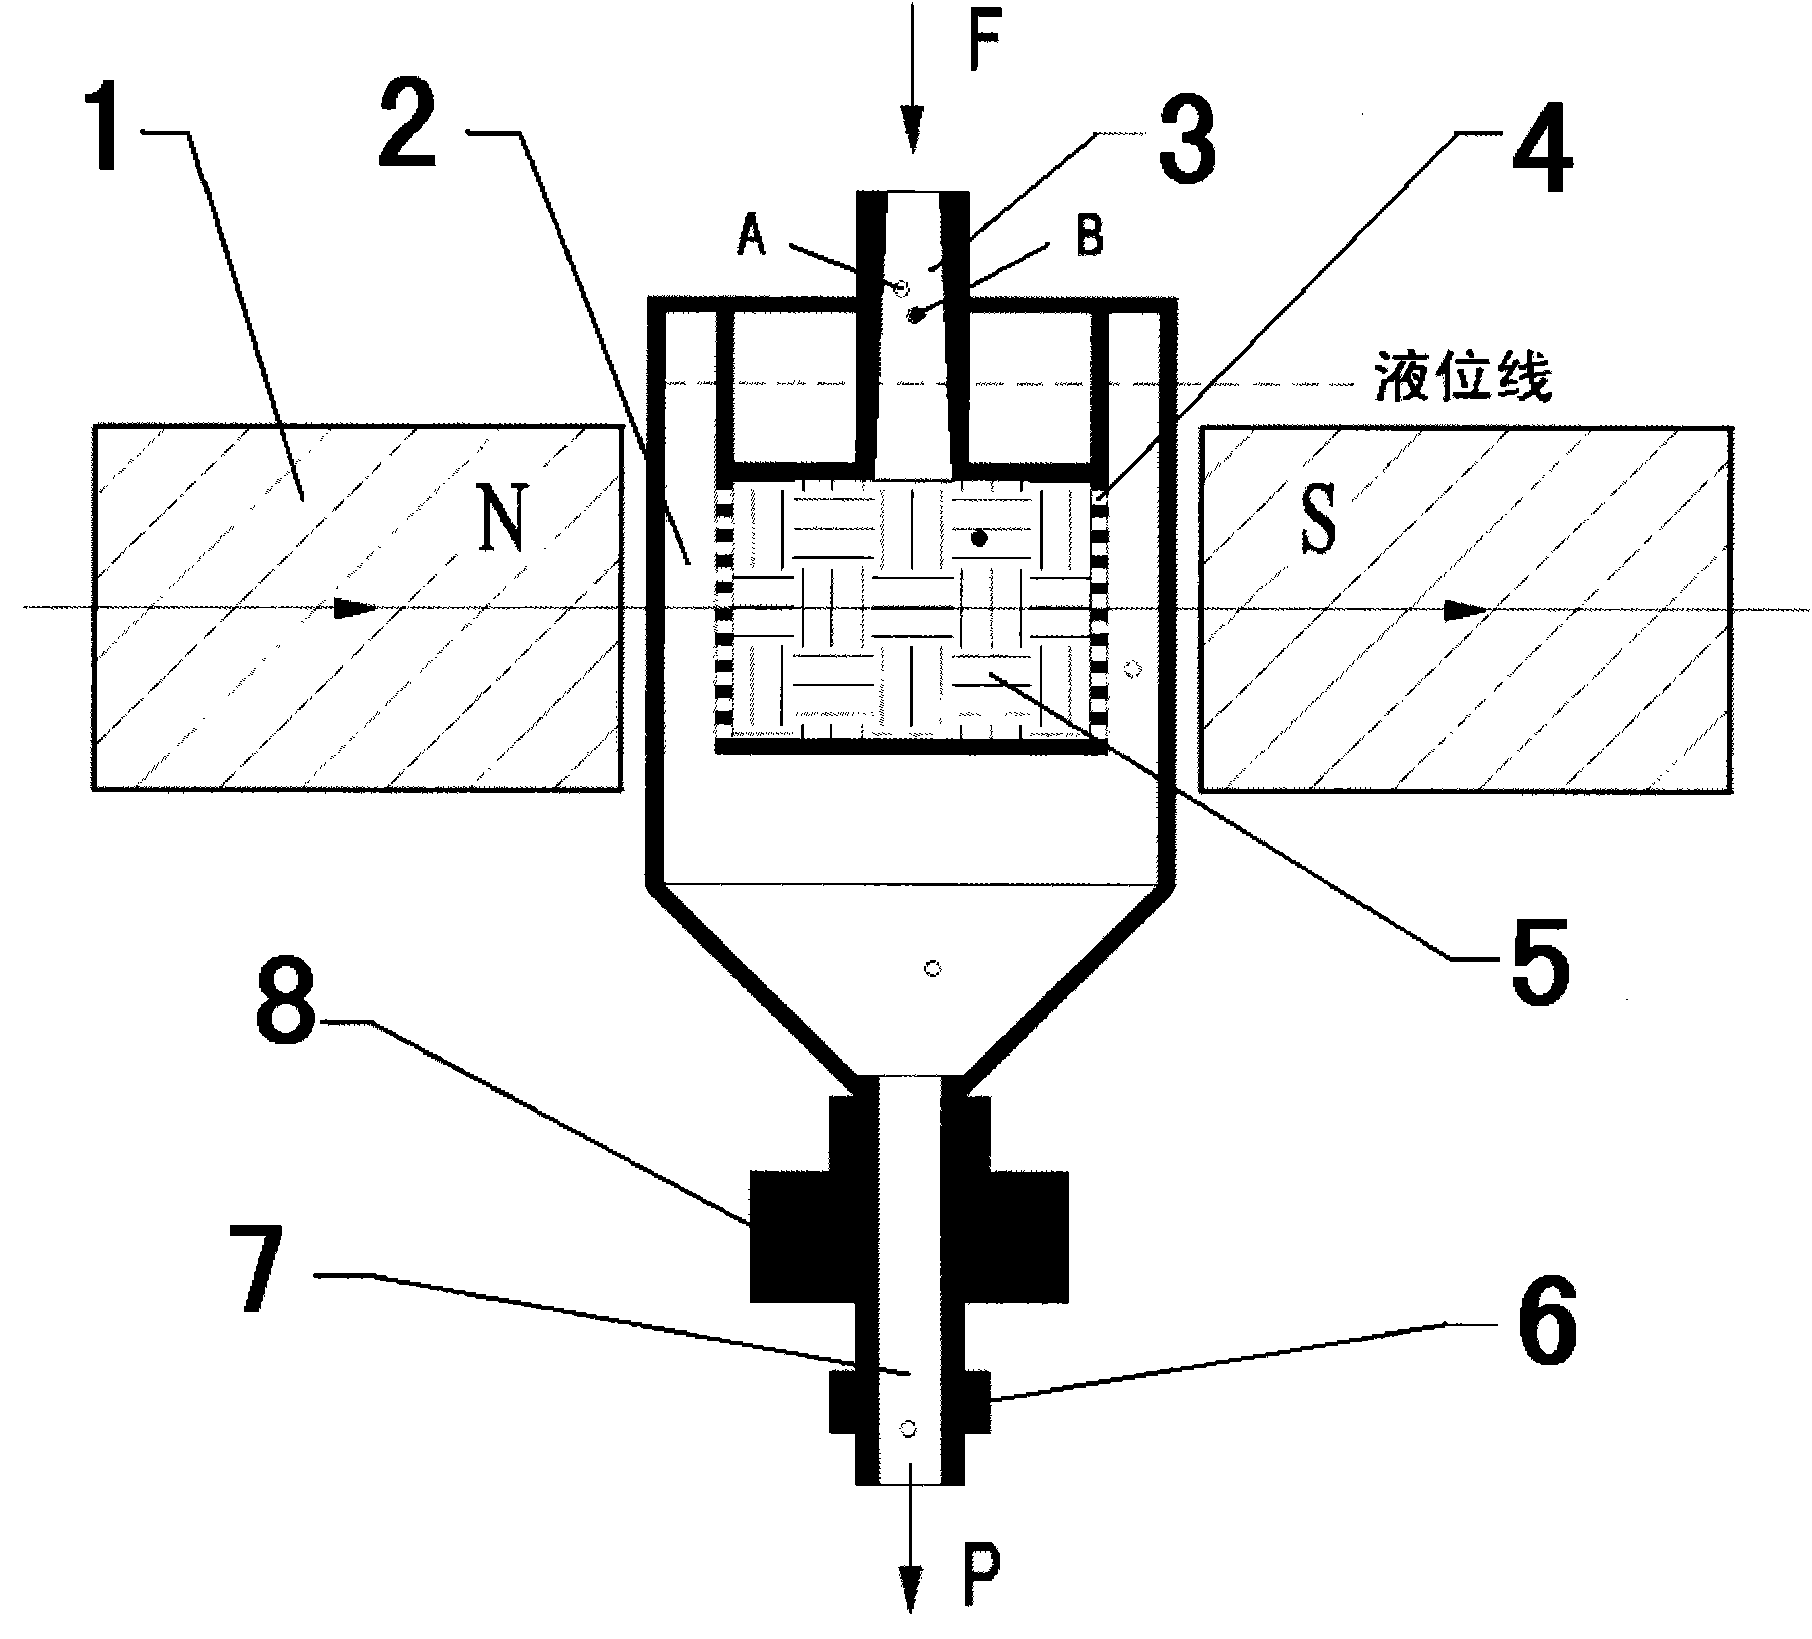 Centrifugal high-gradient magnetic method